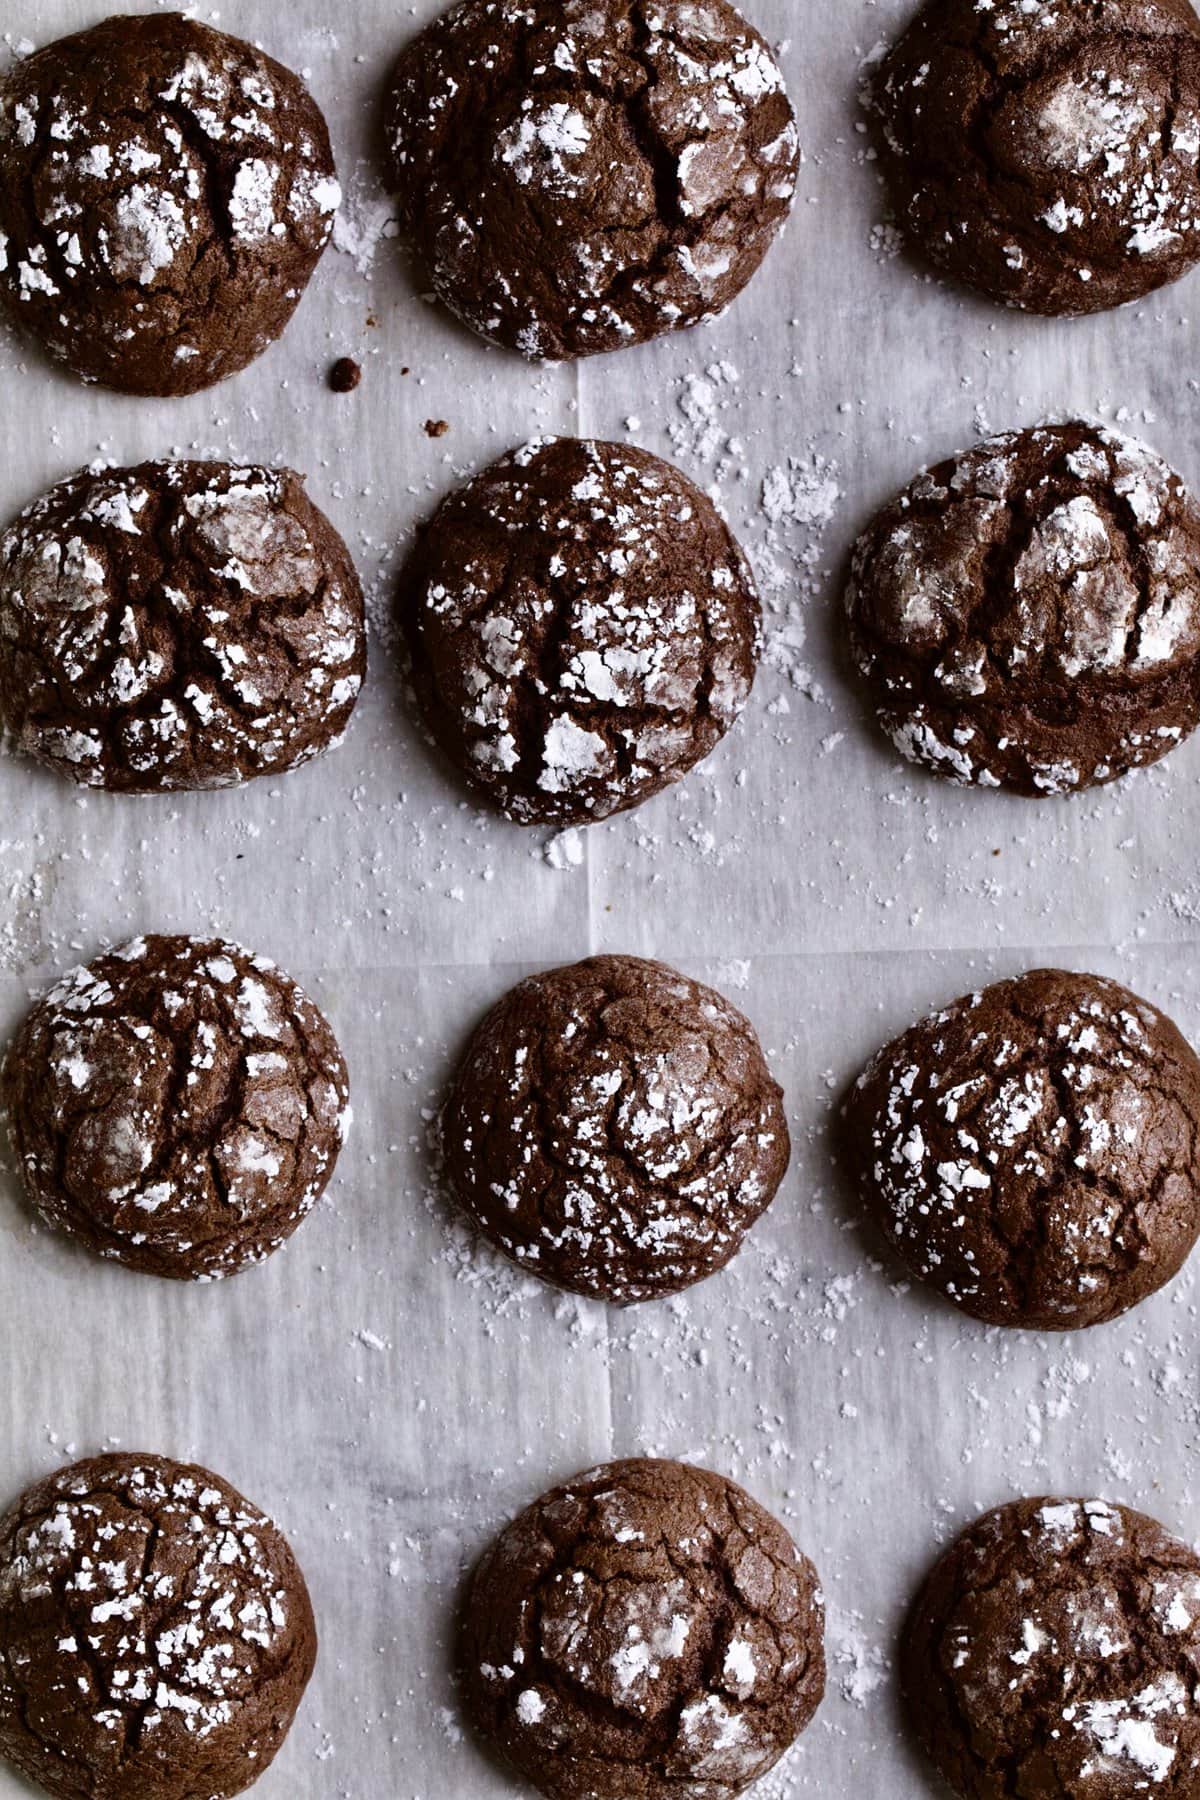 big and soft Italian chocolate spice cookies freshly baked on a baking tray.